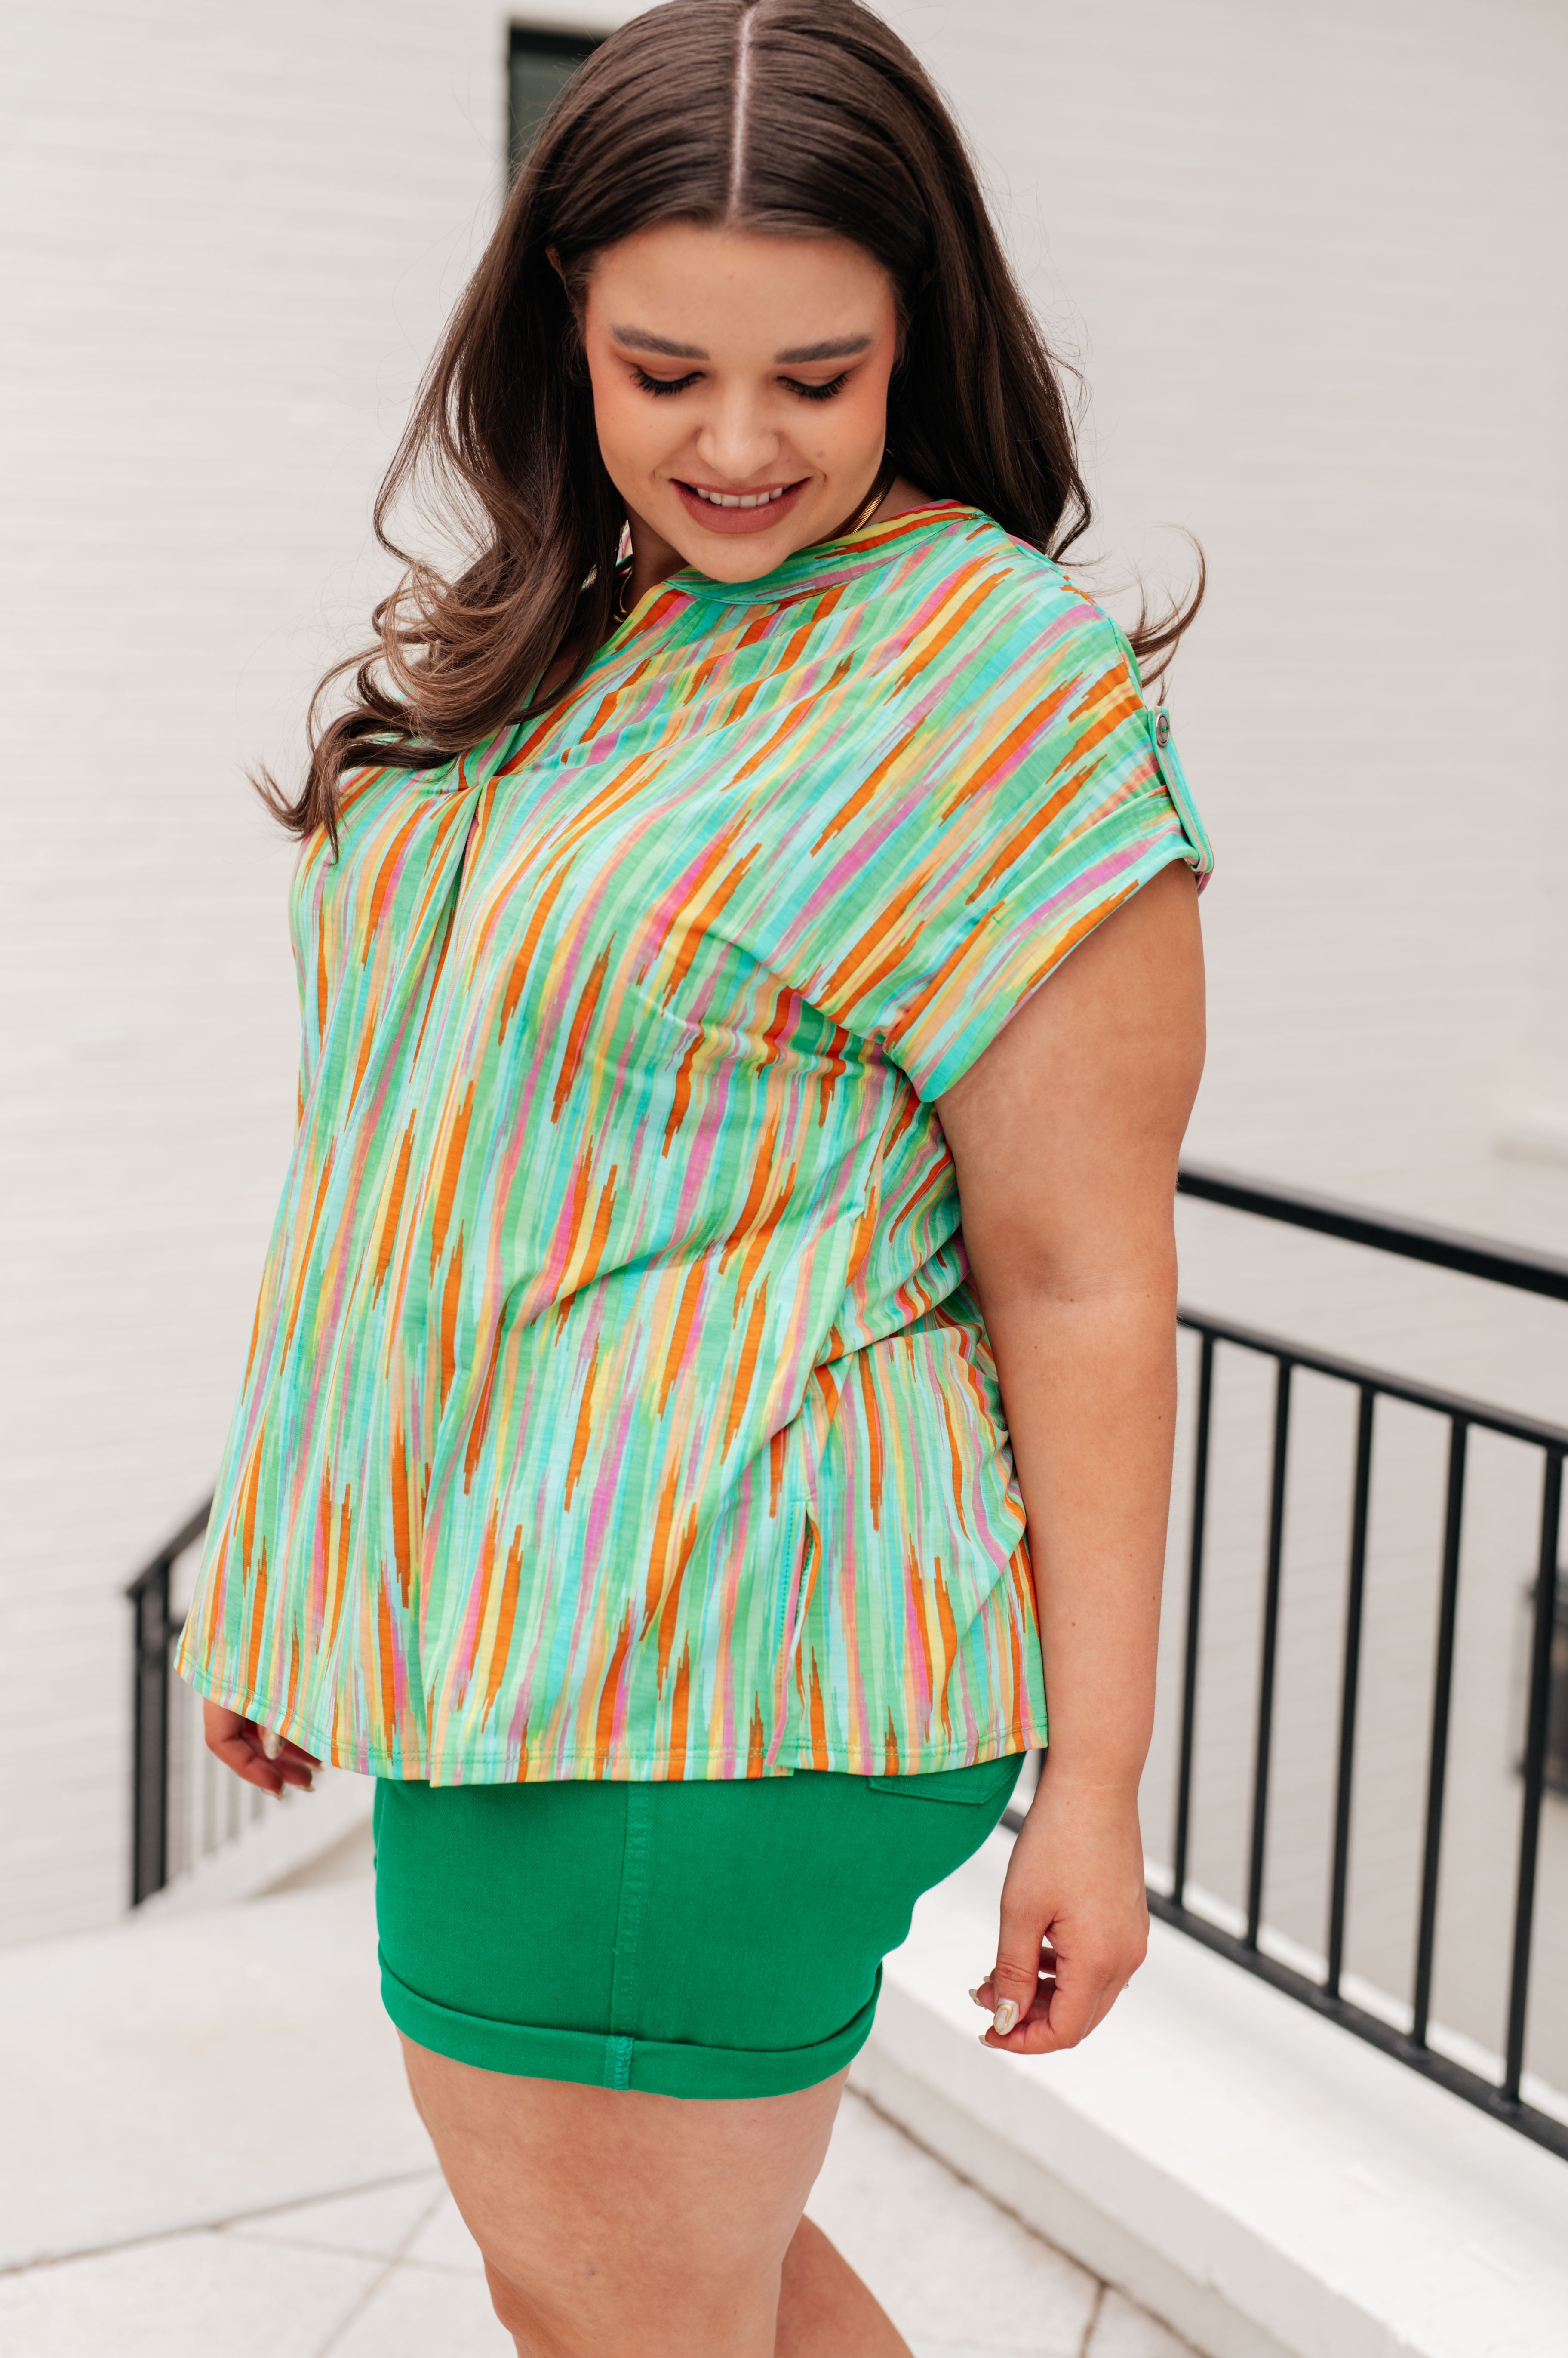 Lizzy Cap Sleeve Top in Lime and Emerald Multi Stripe Ave Shops